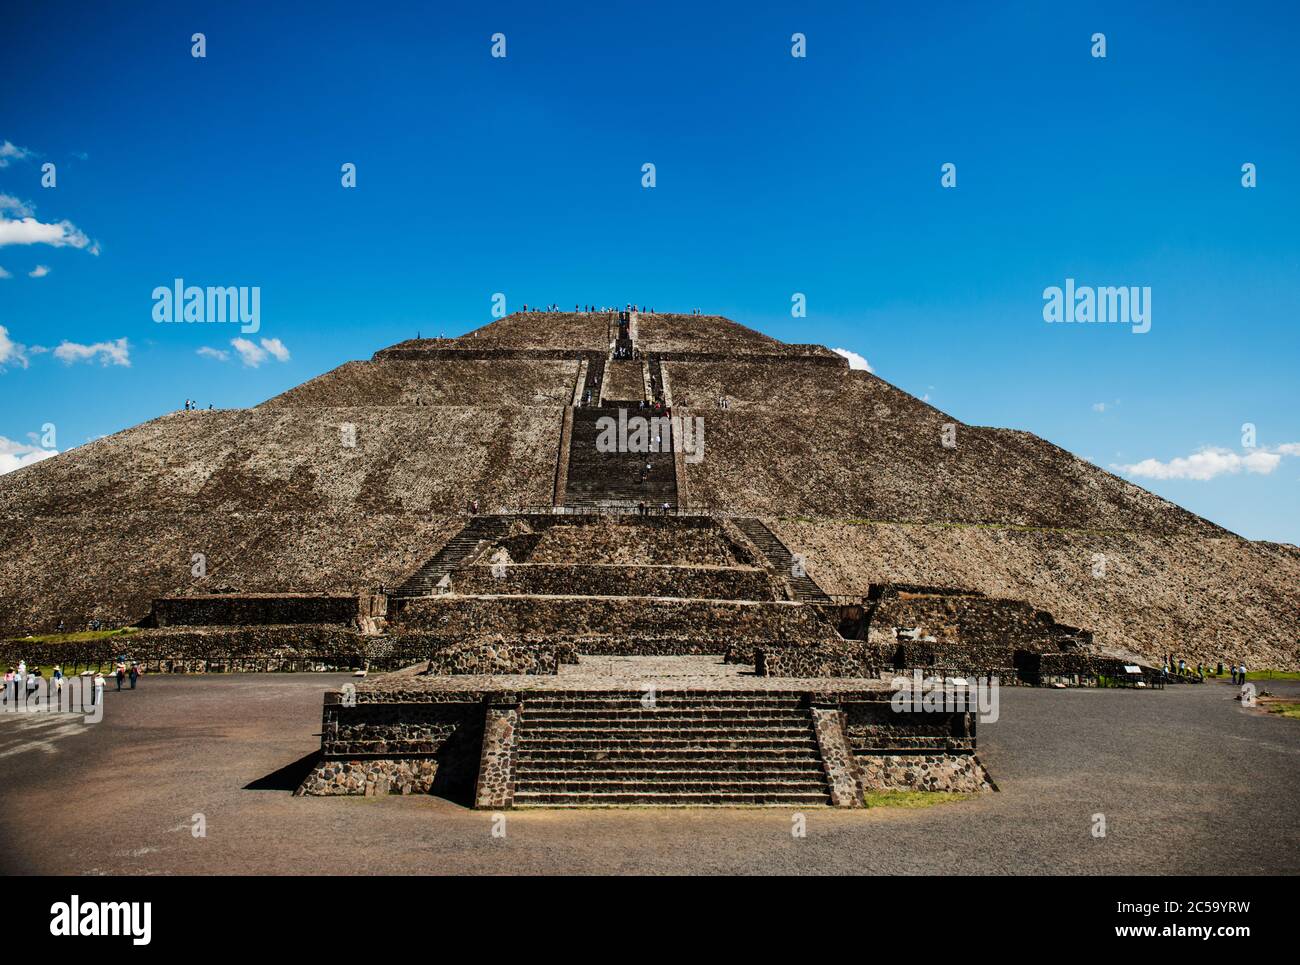 Pyramid of the Sun, Teotihuacan, Mexico Stock Photo